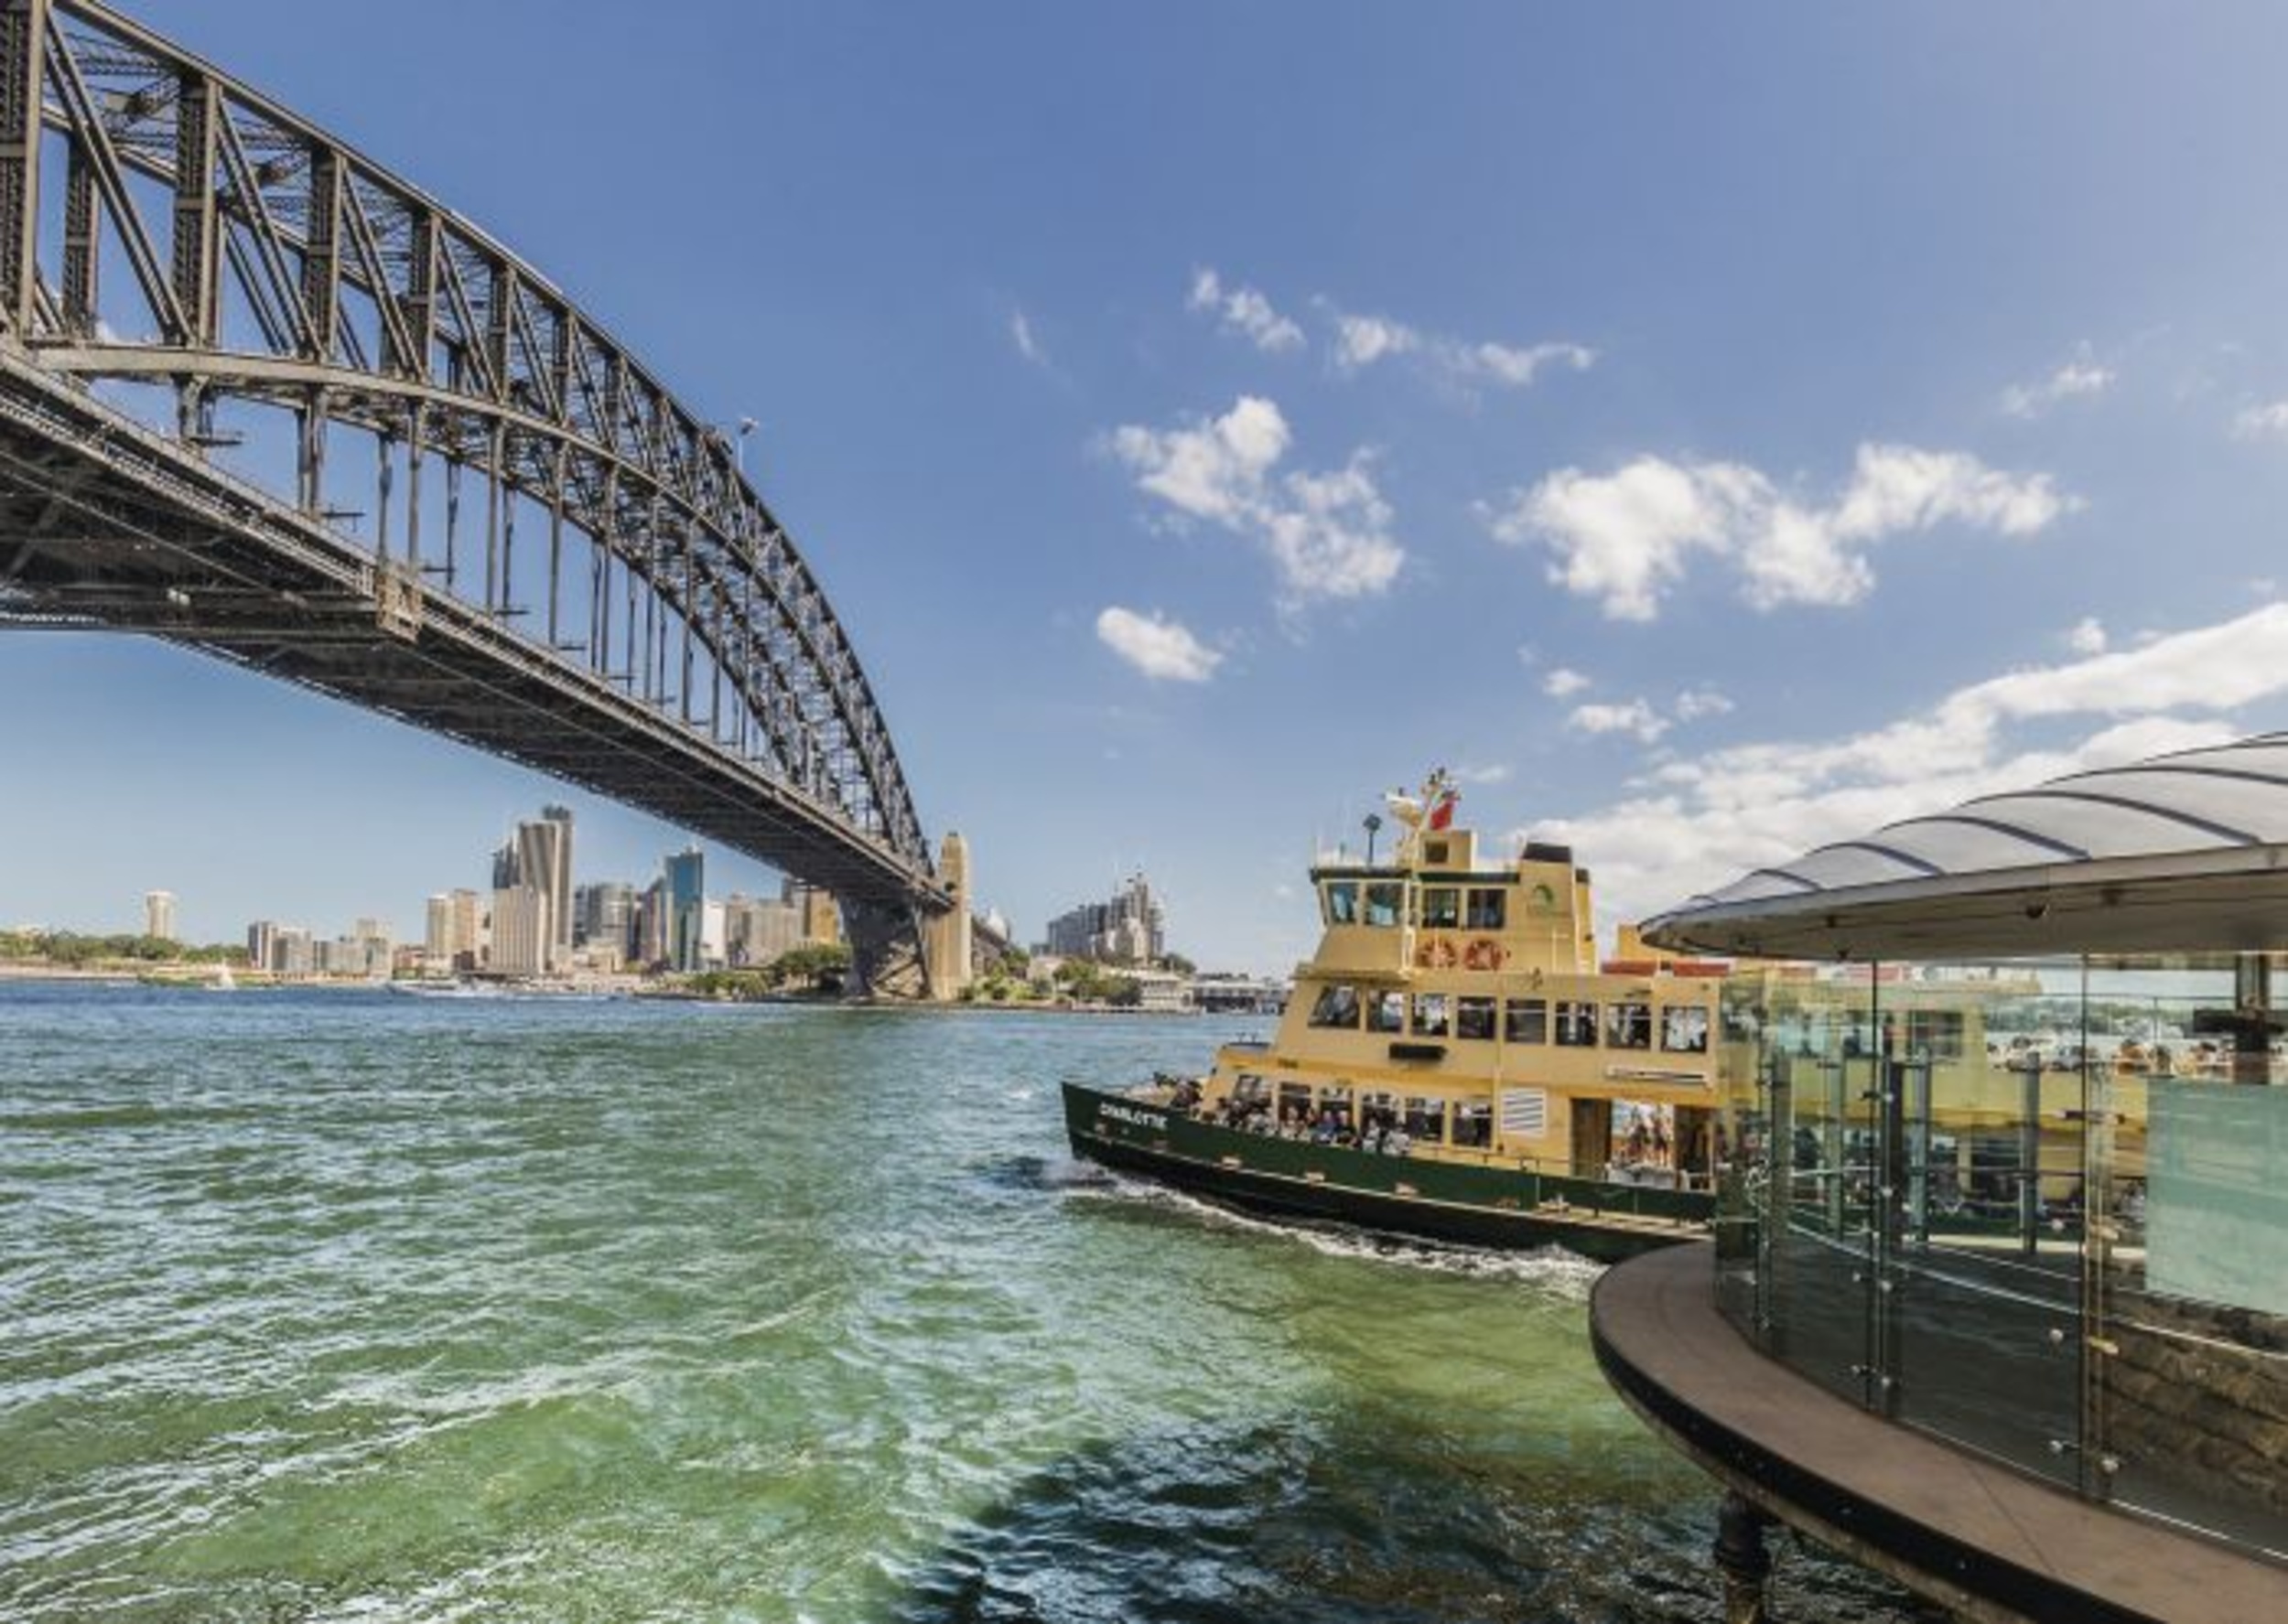 <p>Take a stroll across the harbor bridge for breathtaking views of the skyline, which looks incredible at night and during the day. Few cities look great at all hours of the day.</p><p><a href='https://www.msn.com/en-us/community/channel/vid-cj9pqbr0vn9in2b6ddcd8sfgpfq6x6utp44fssrv6mc2gtybw0us'>Follow us on MSN to see more of our exclusive lifestyle content.</a></p>